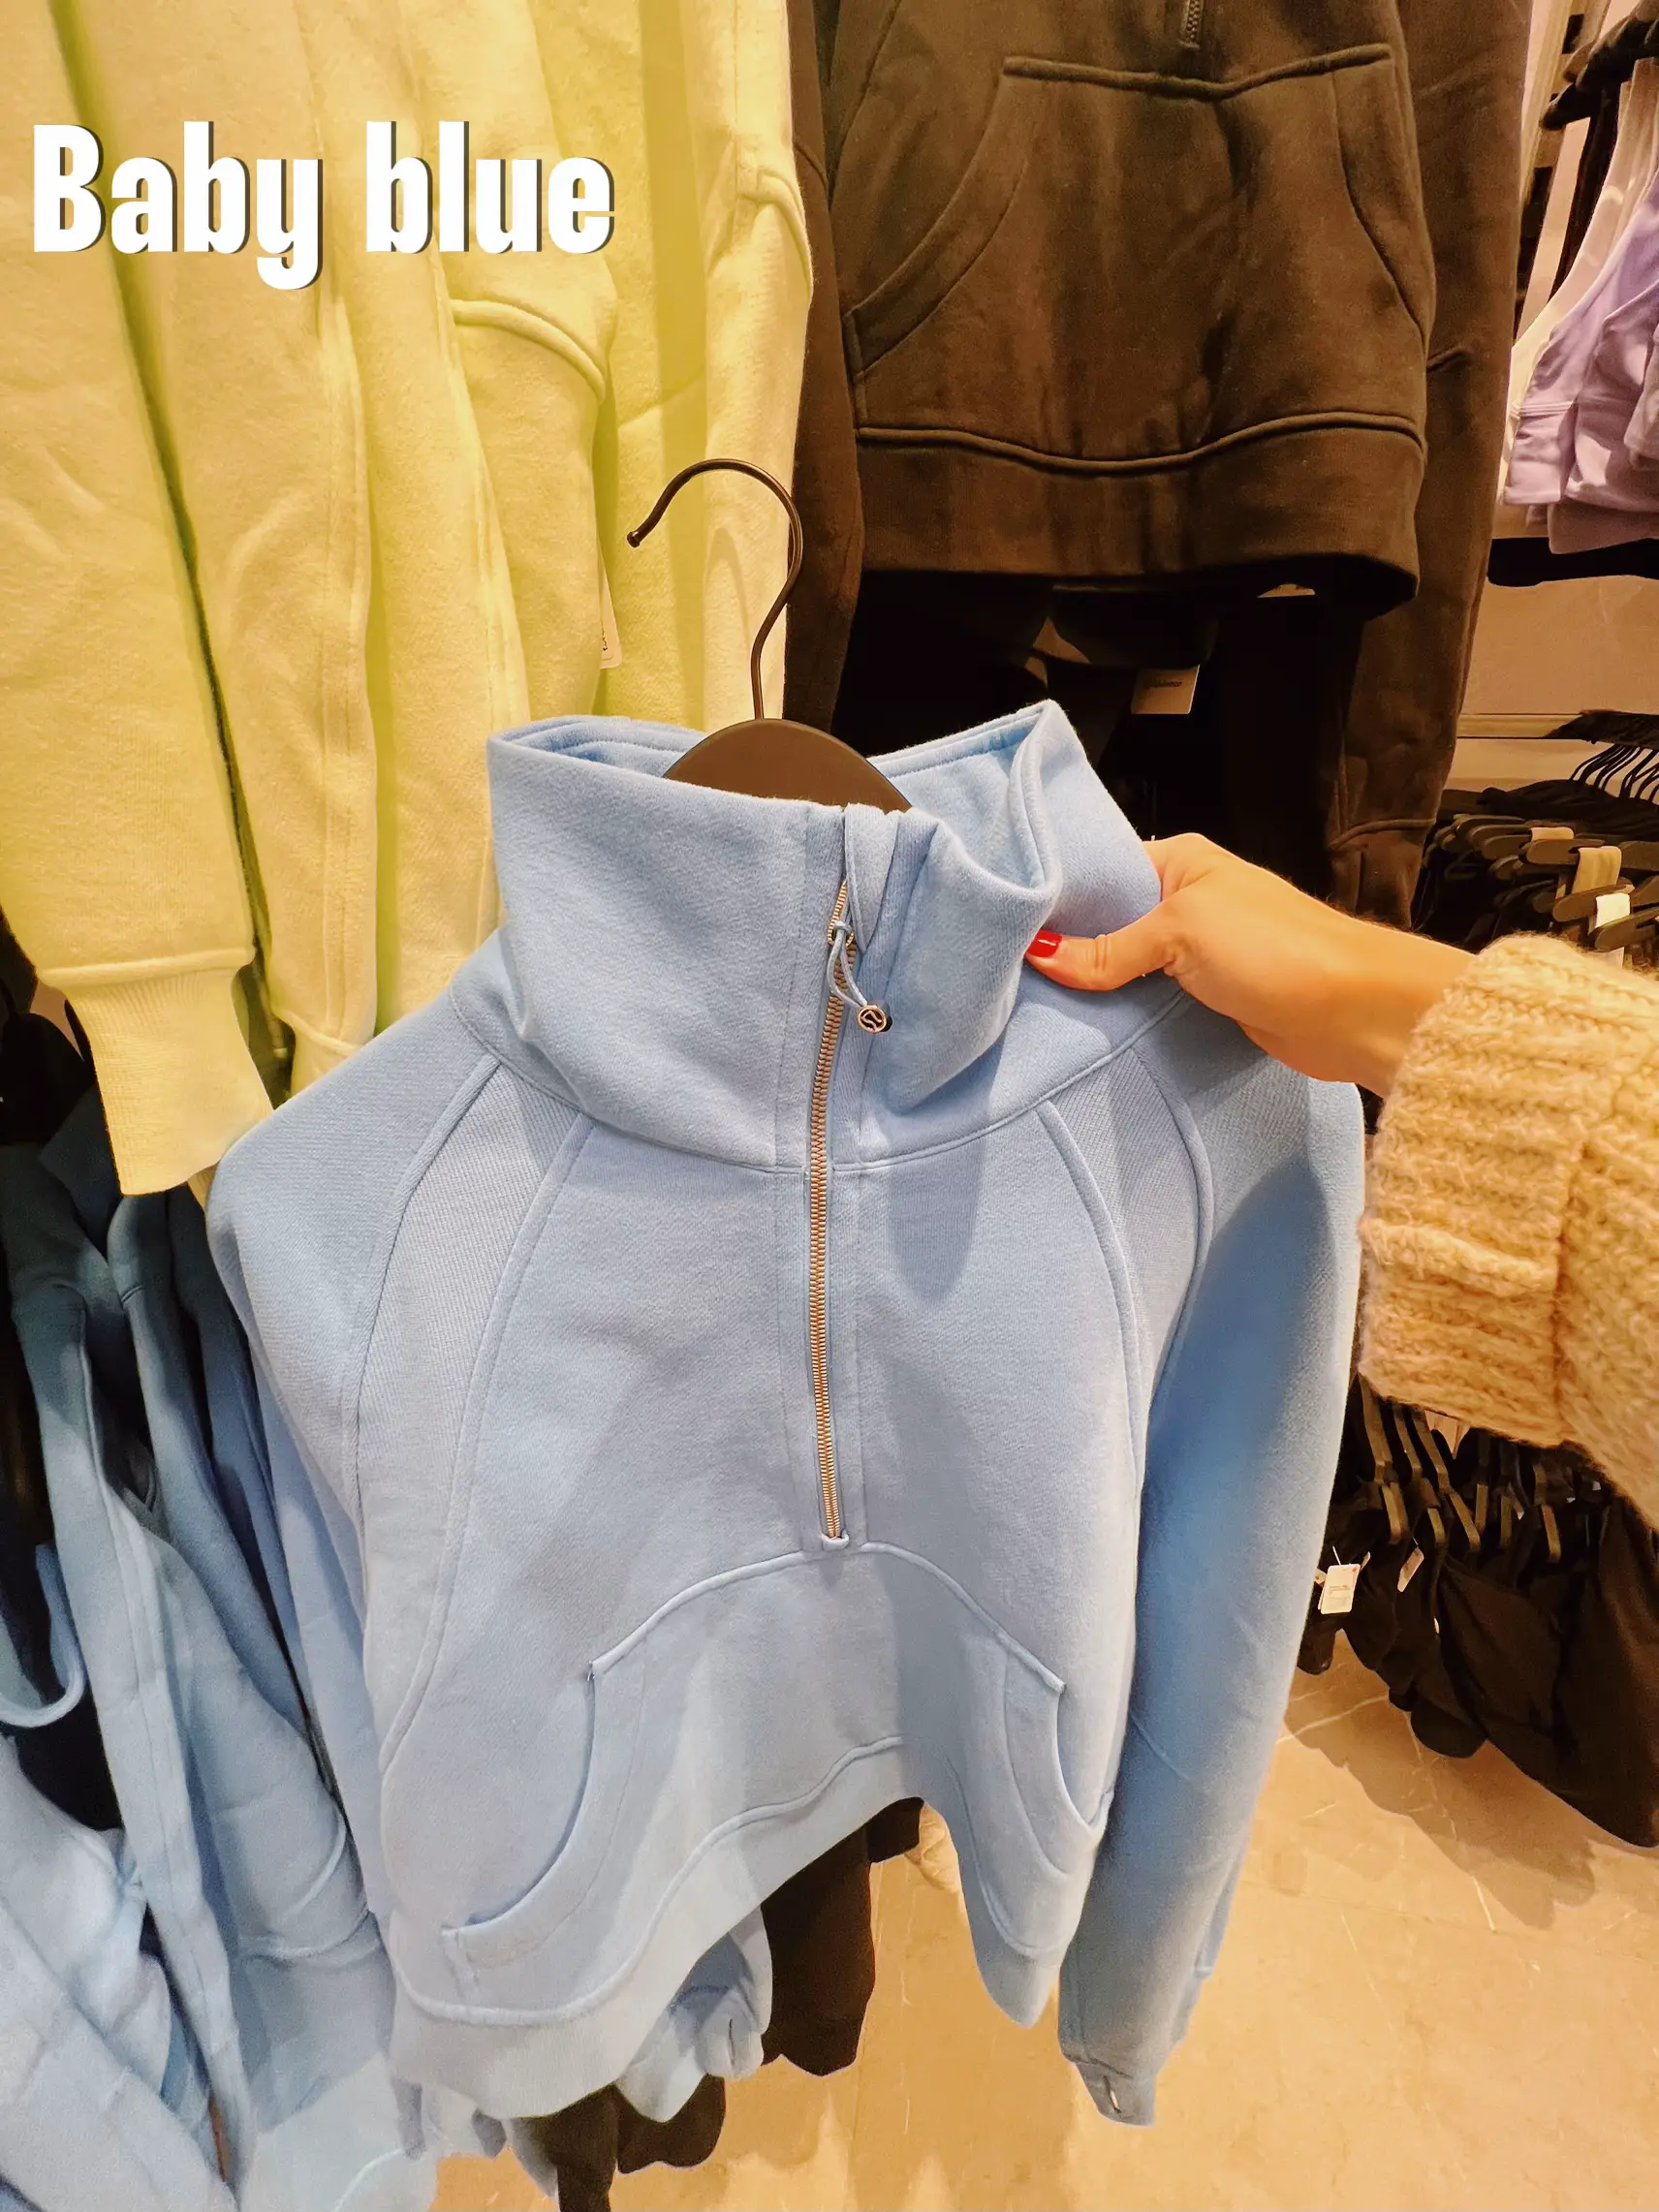 Lululemon Define Jacket Dupe from !, Gallery posted by  Lexirosenstein